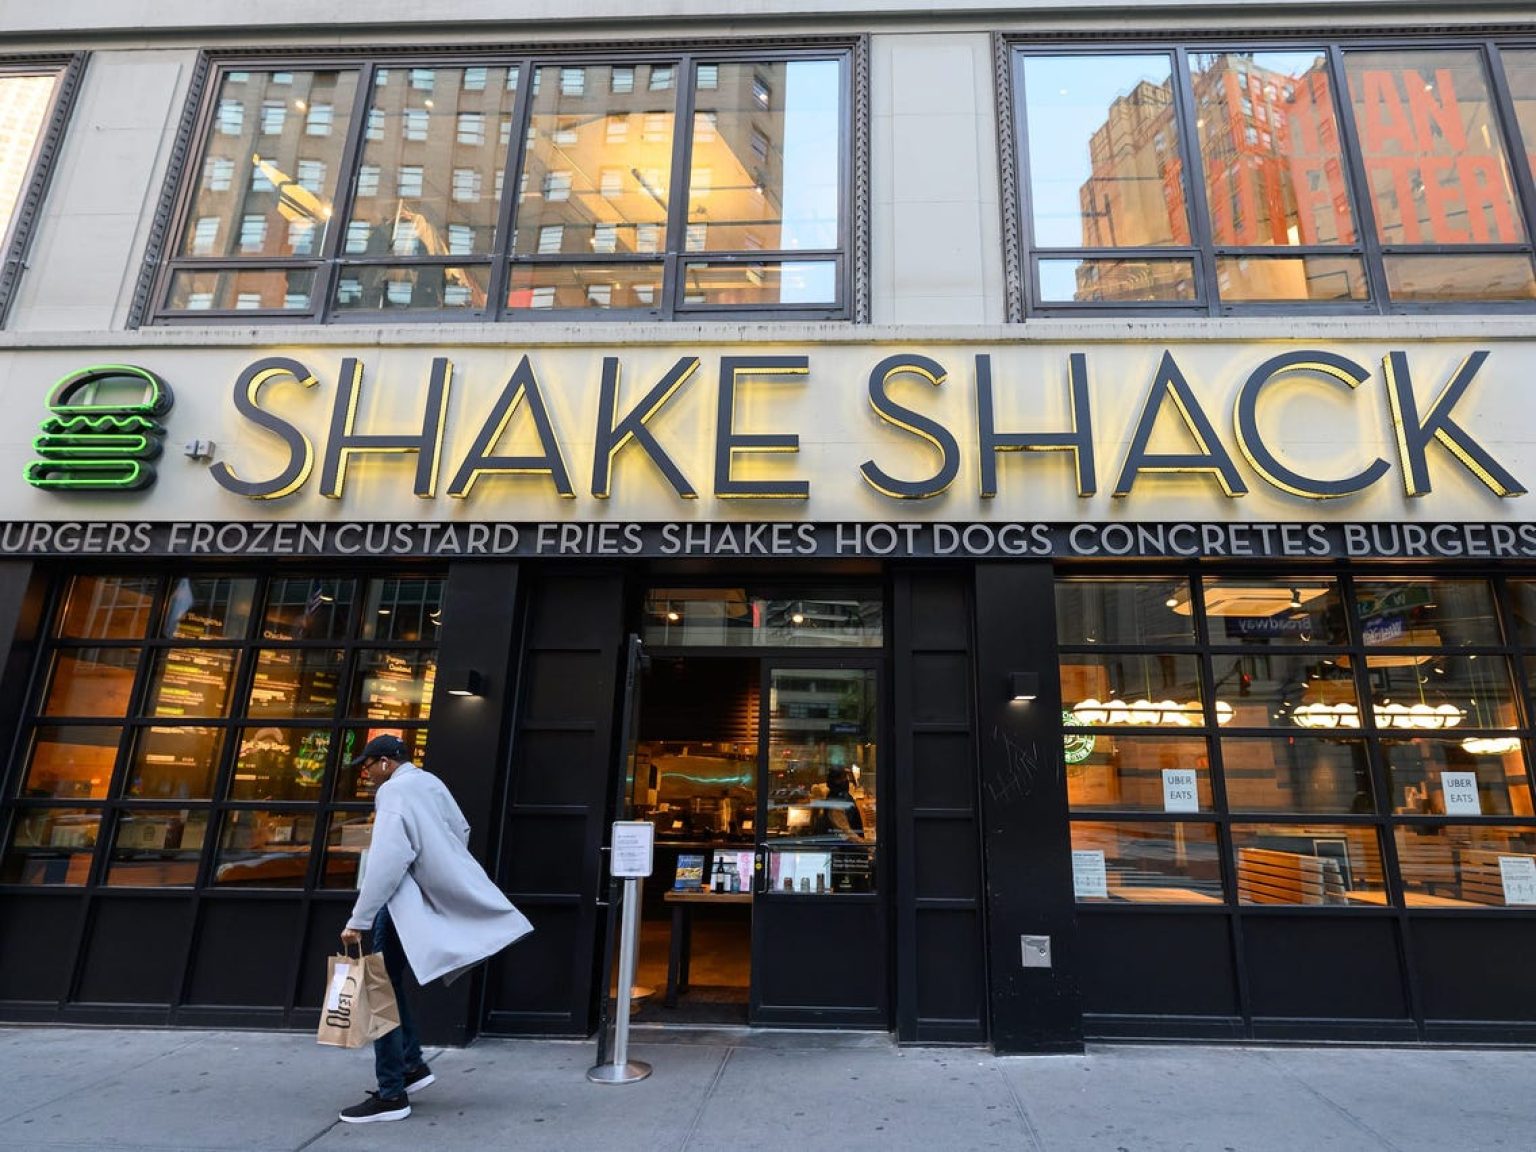 Shake Shack: The Burger Brand That Expanded Through Word of Mouth